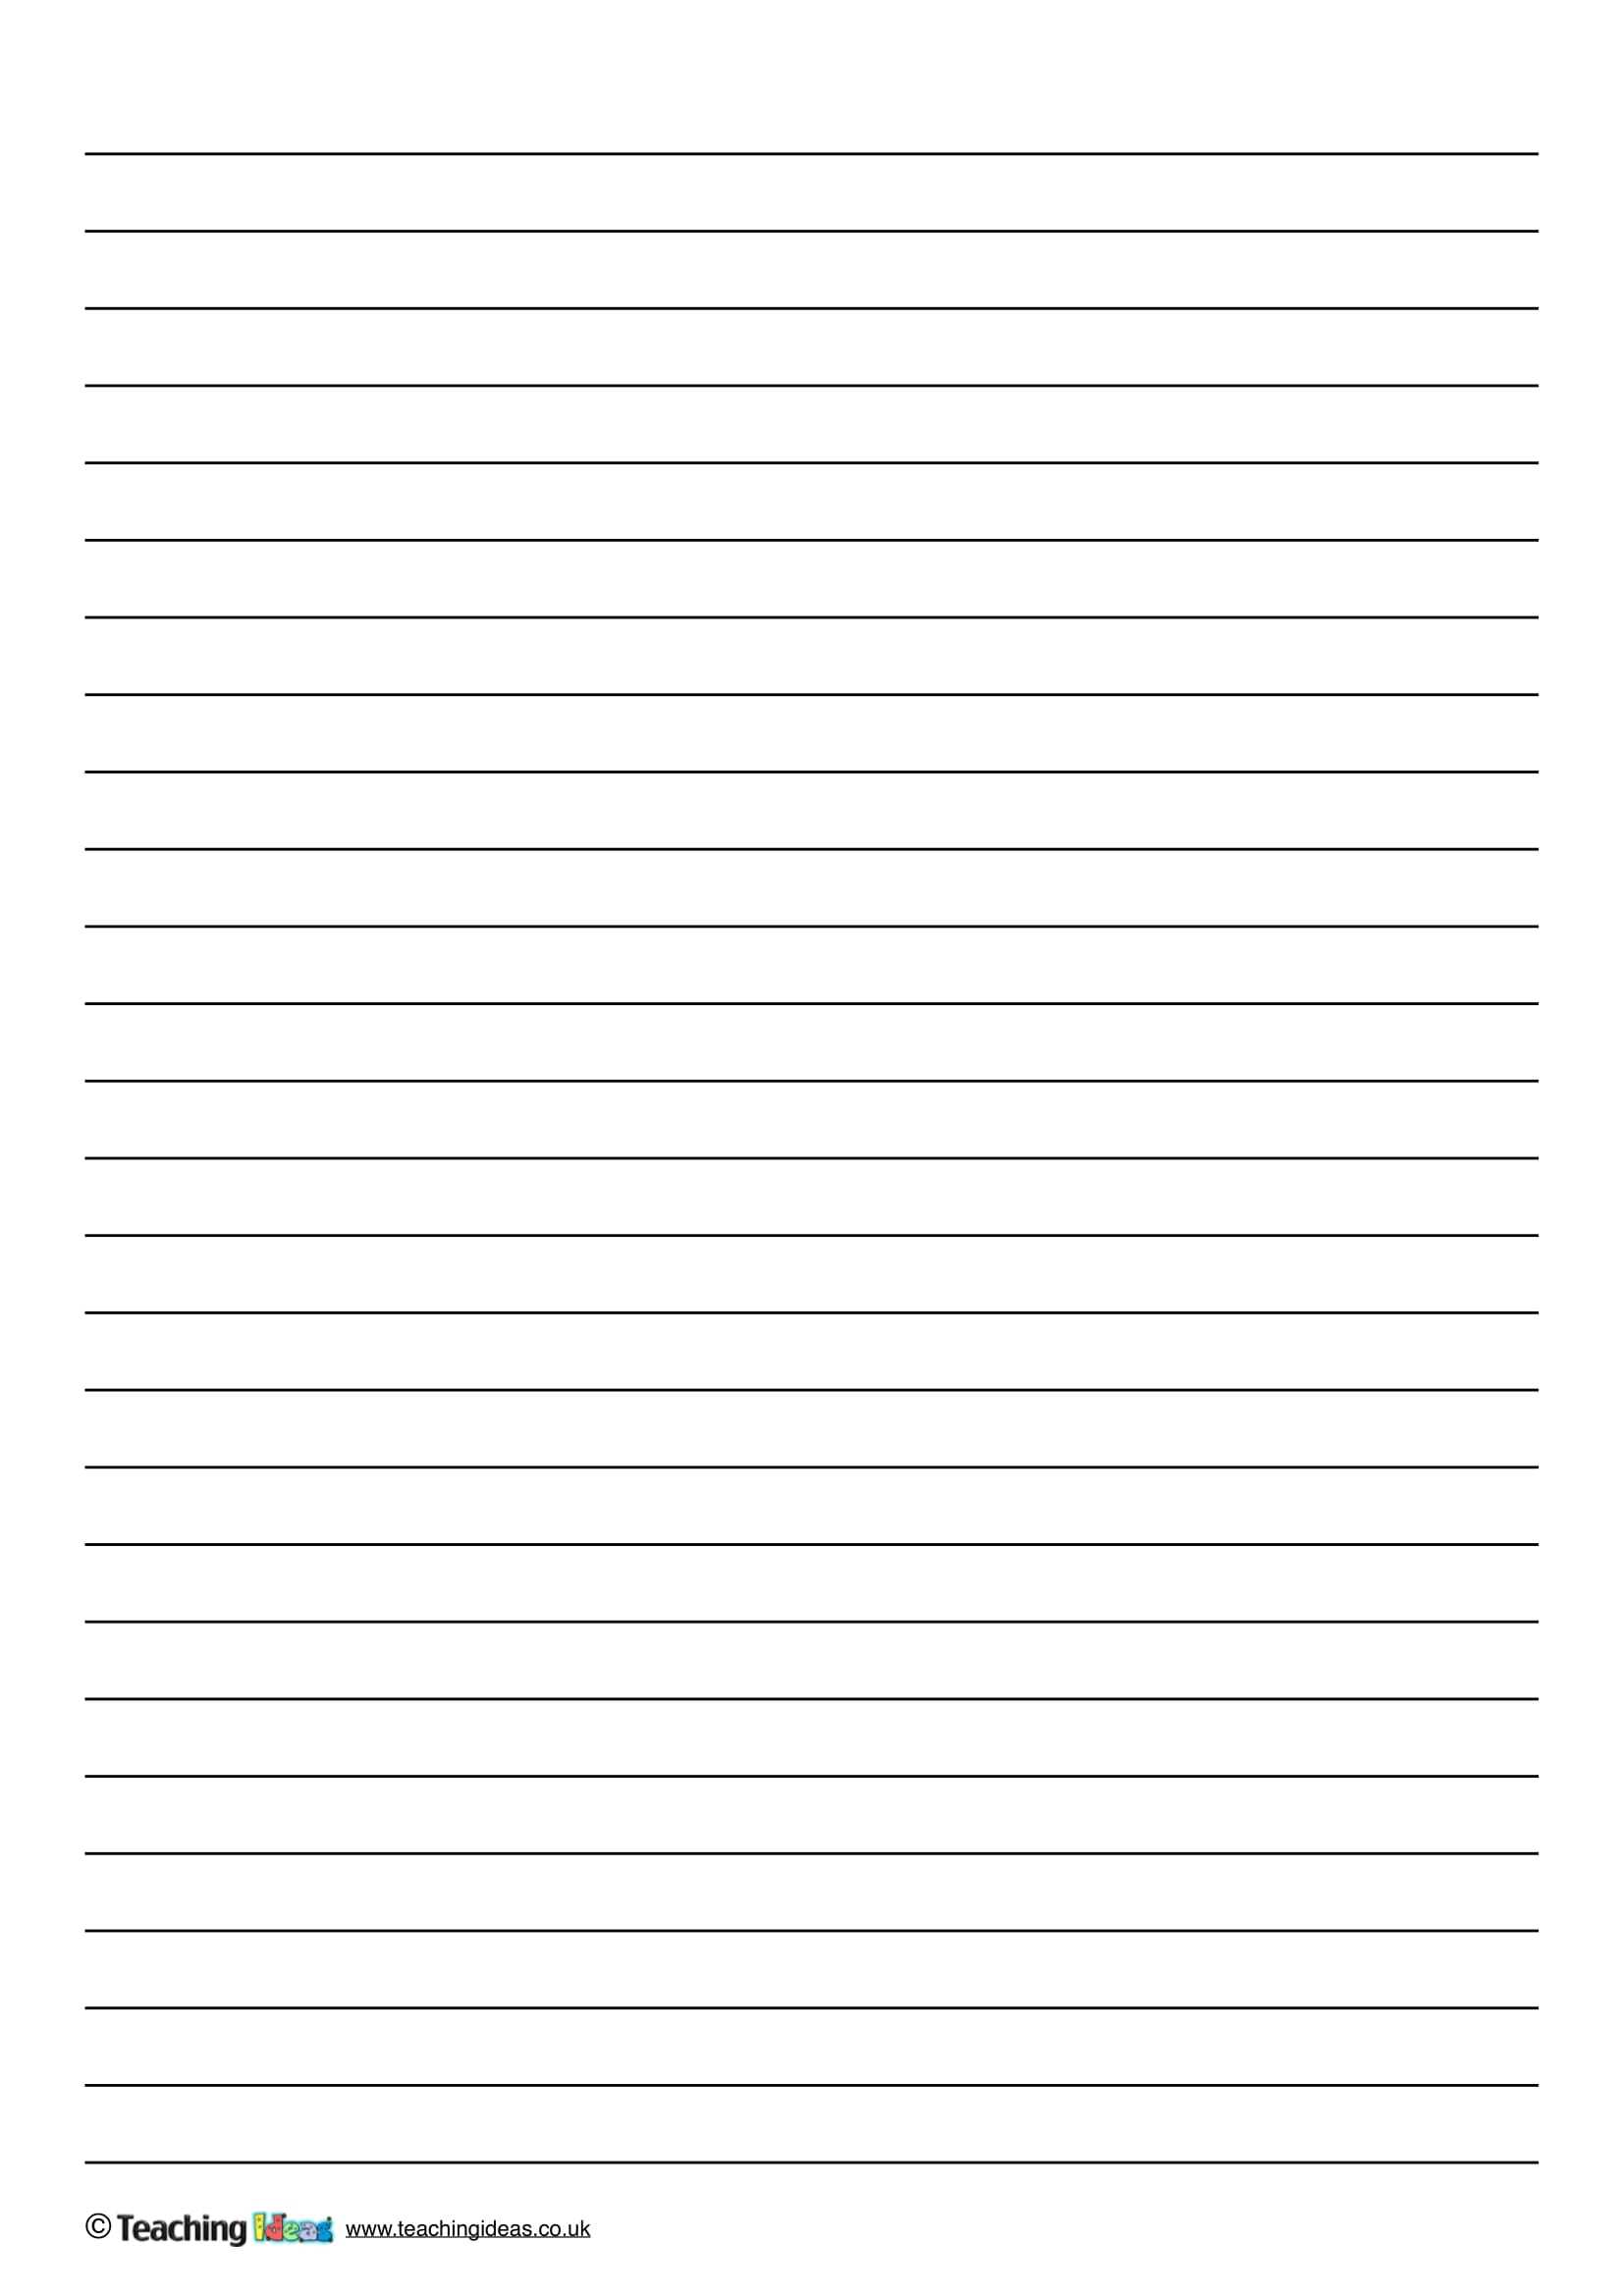 11+ Lined Paper Templates – Pdf | Free & Premium Templates Regarding Ruled Paper Template Word